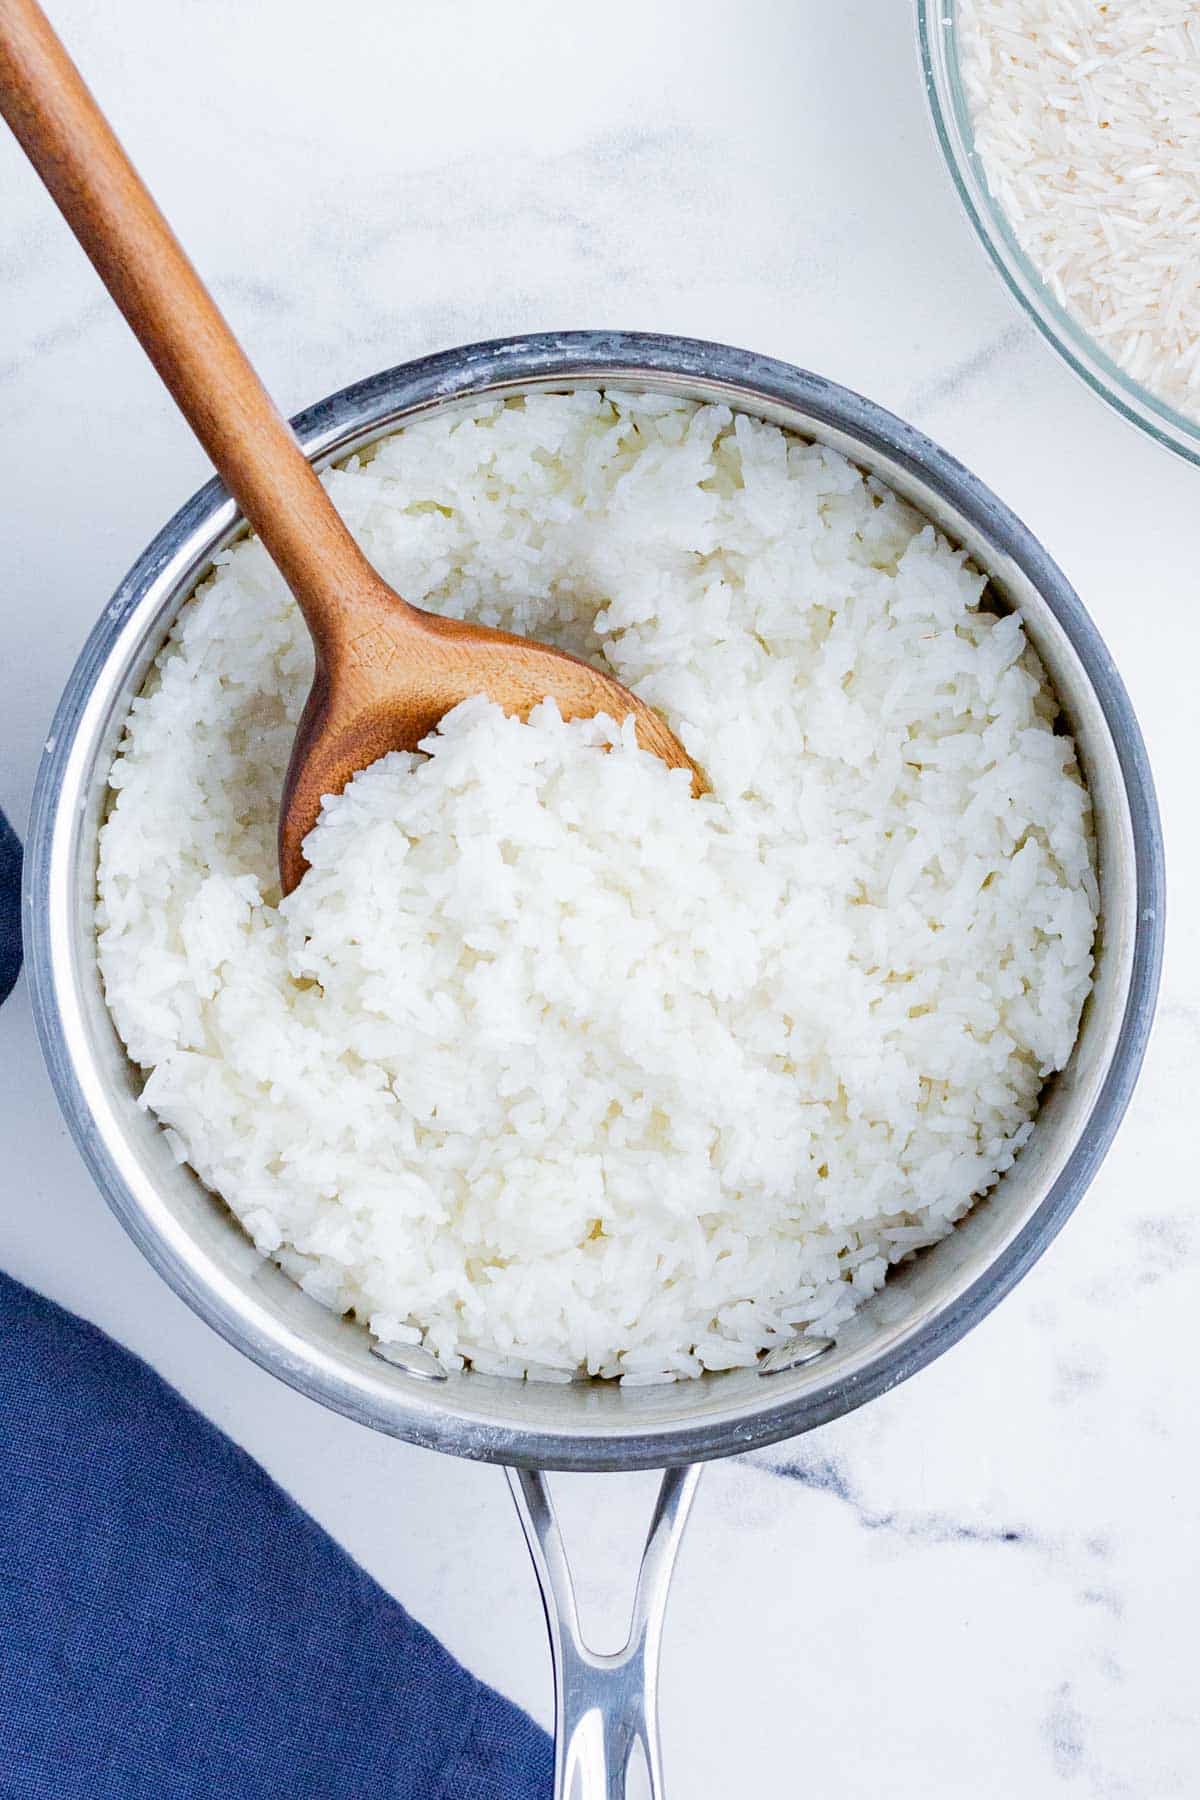 A silver pot full of white cooked rice and a wooden spoon with uncooked rice in a clear bowl on the side.